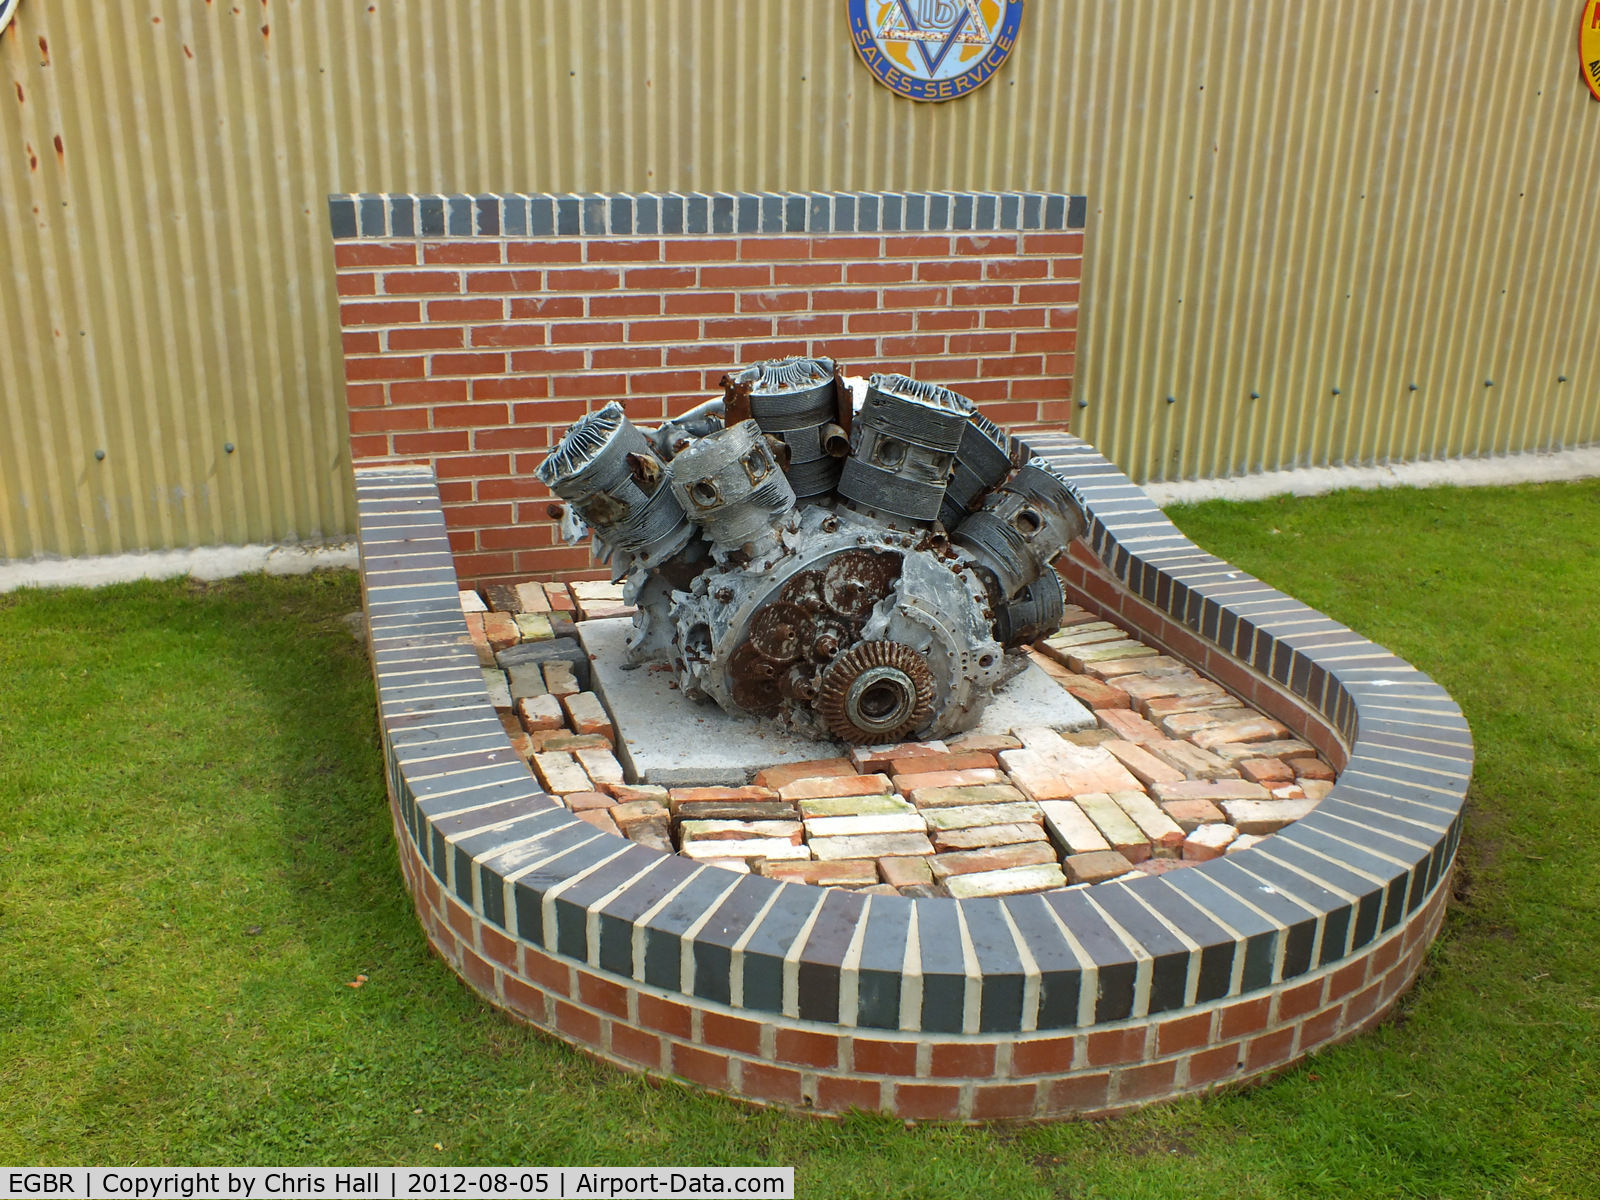 EGBR Airport - Bristol Hercules XVI radial engine recovered from the crash site of Handley Page Halifax Mk III LV905/EY-W which was shot down on the evening of 24th May 1944 near Bergse Maas, Holland with the lost of all seven crew members.